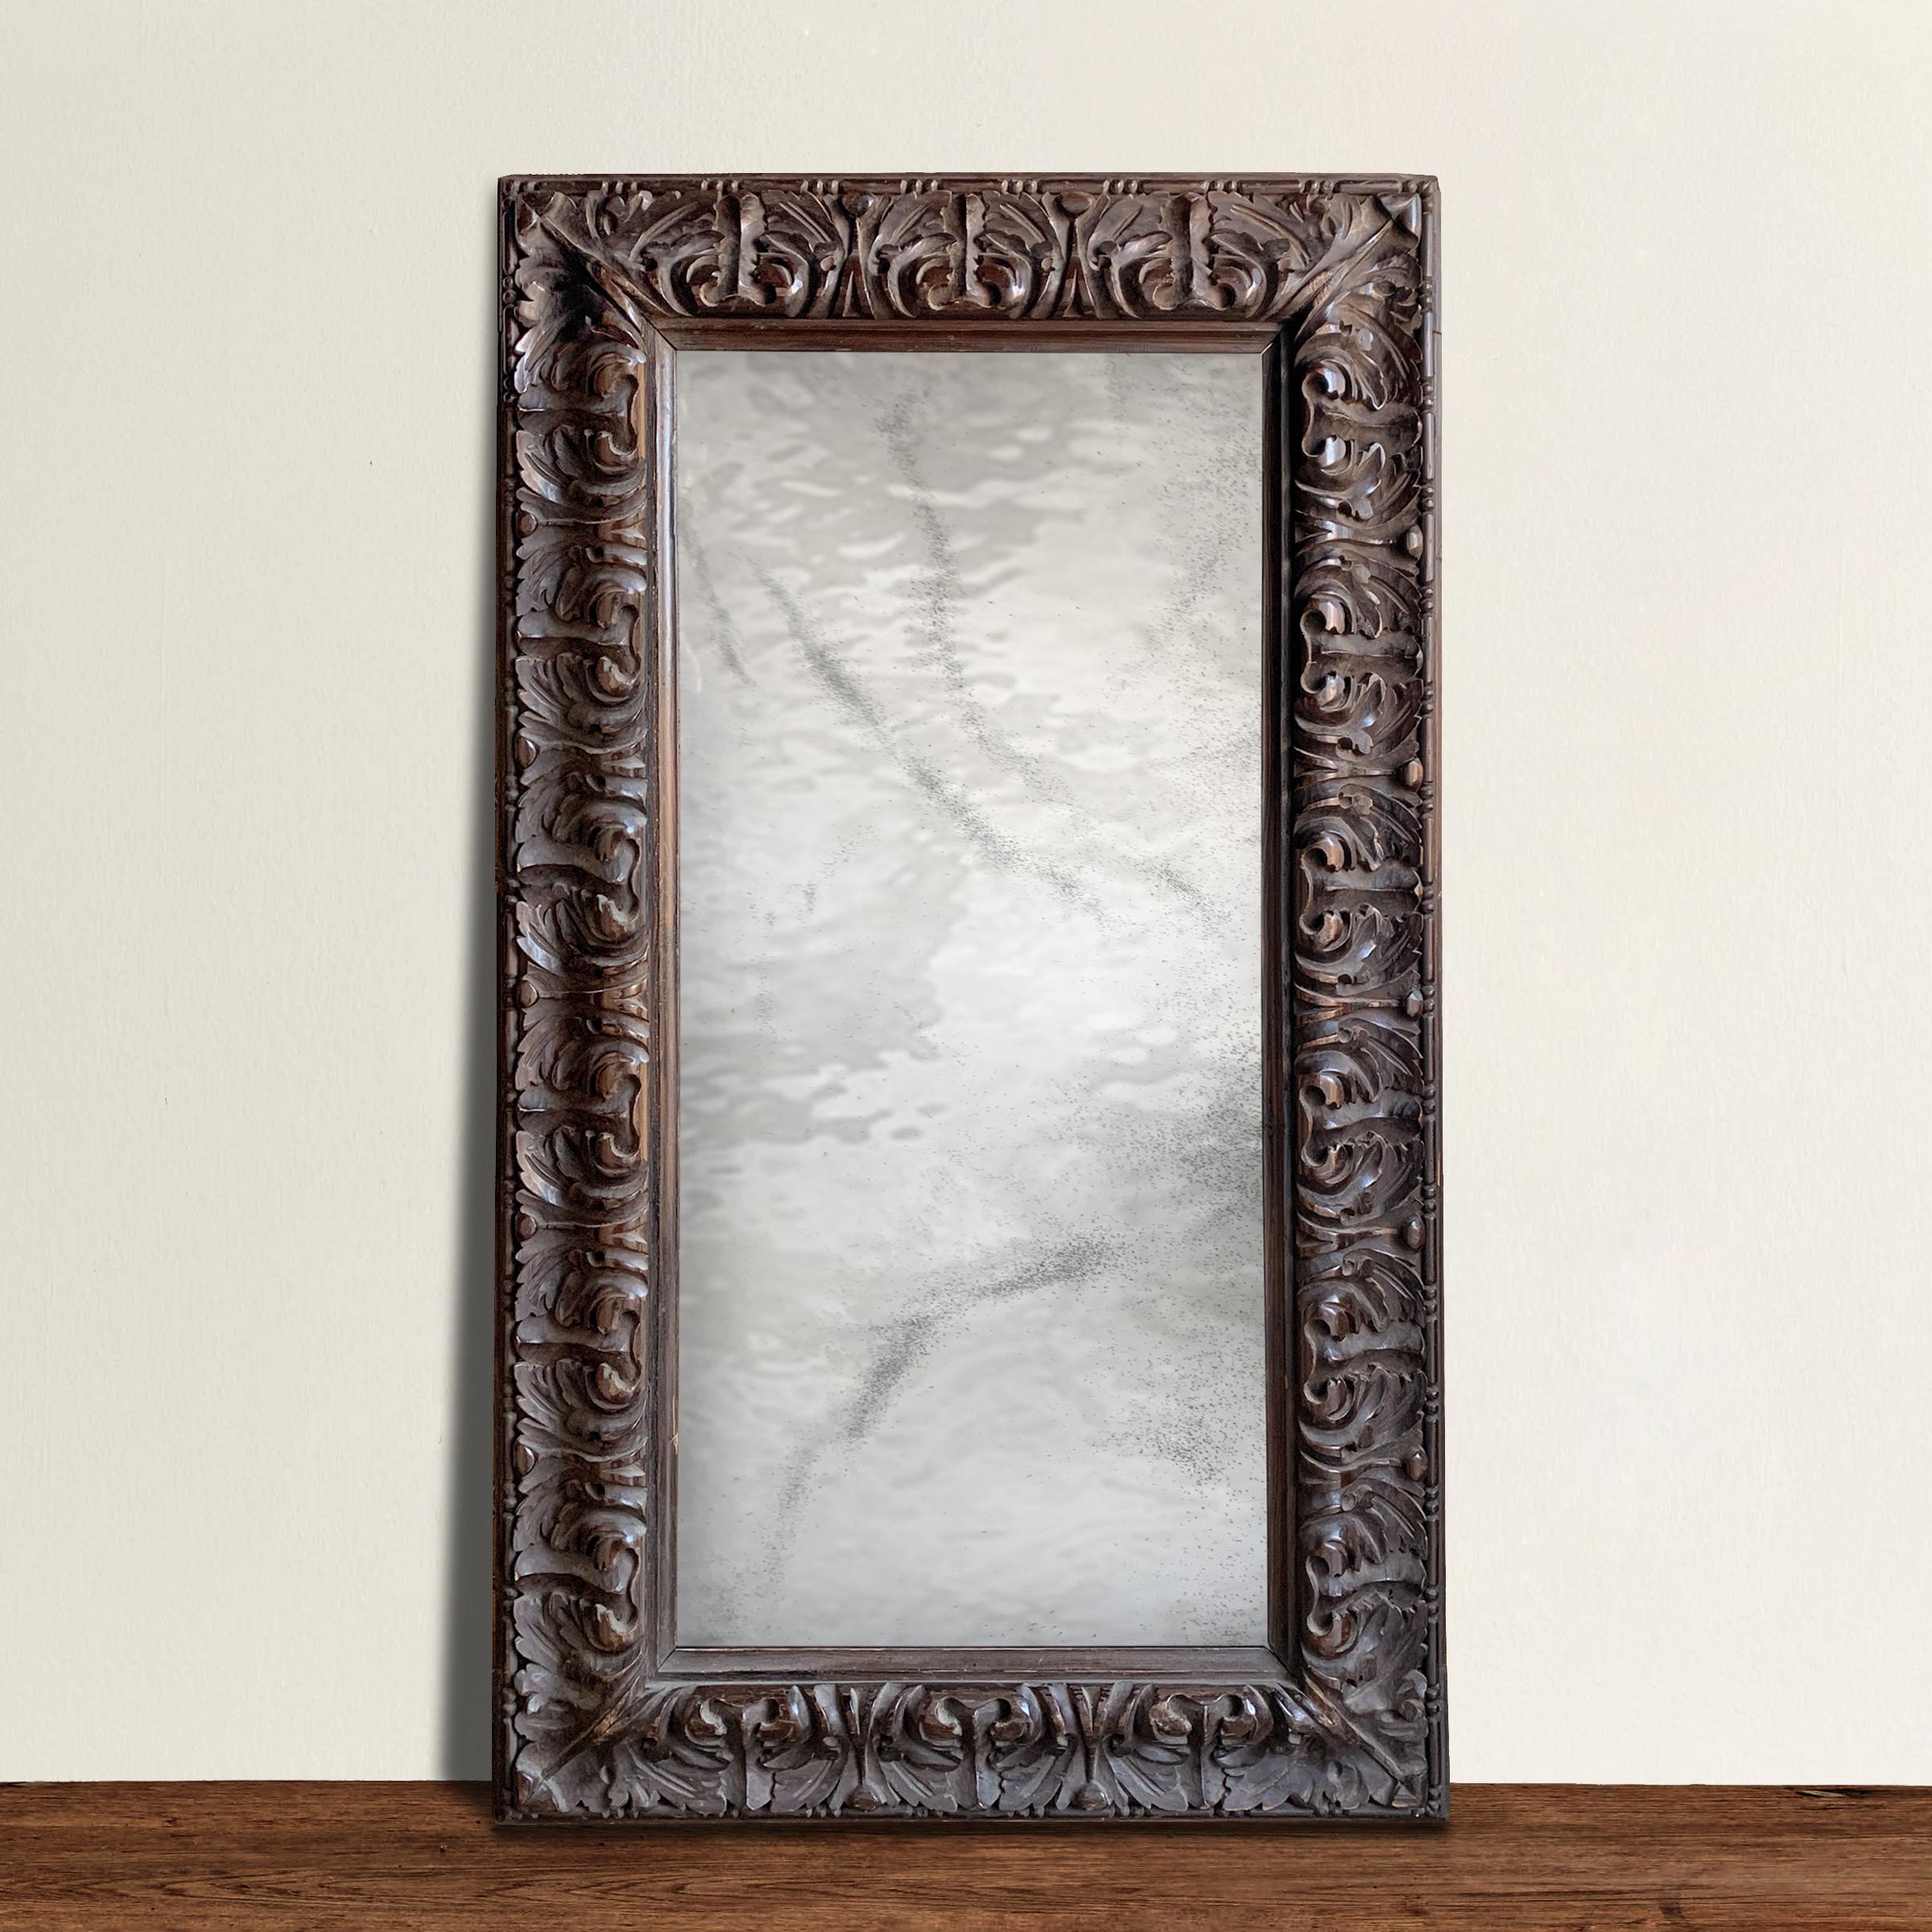 An outstanding and romantic 19th century Italian hand carved wood frame with a classical acanthus leaf motif and with a custom antiqued wavy glass mirror. From a distance, anything in the mirror is wonderfully distorted, but things come into view as